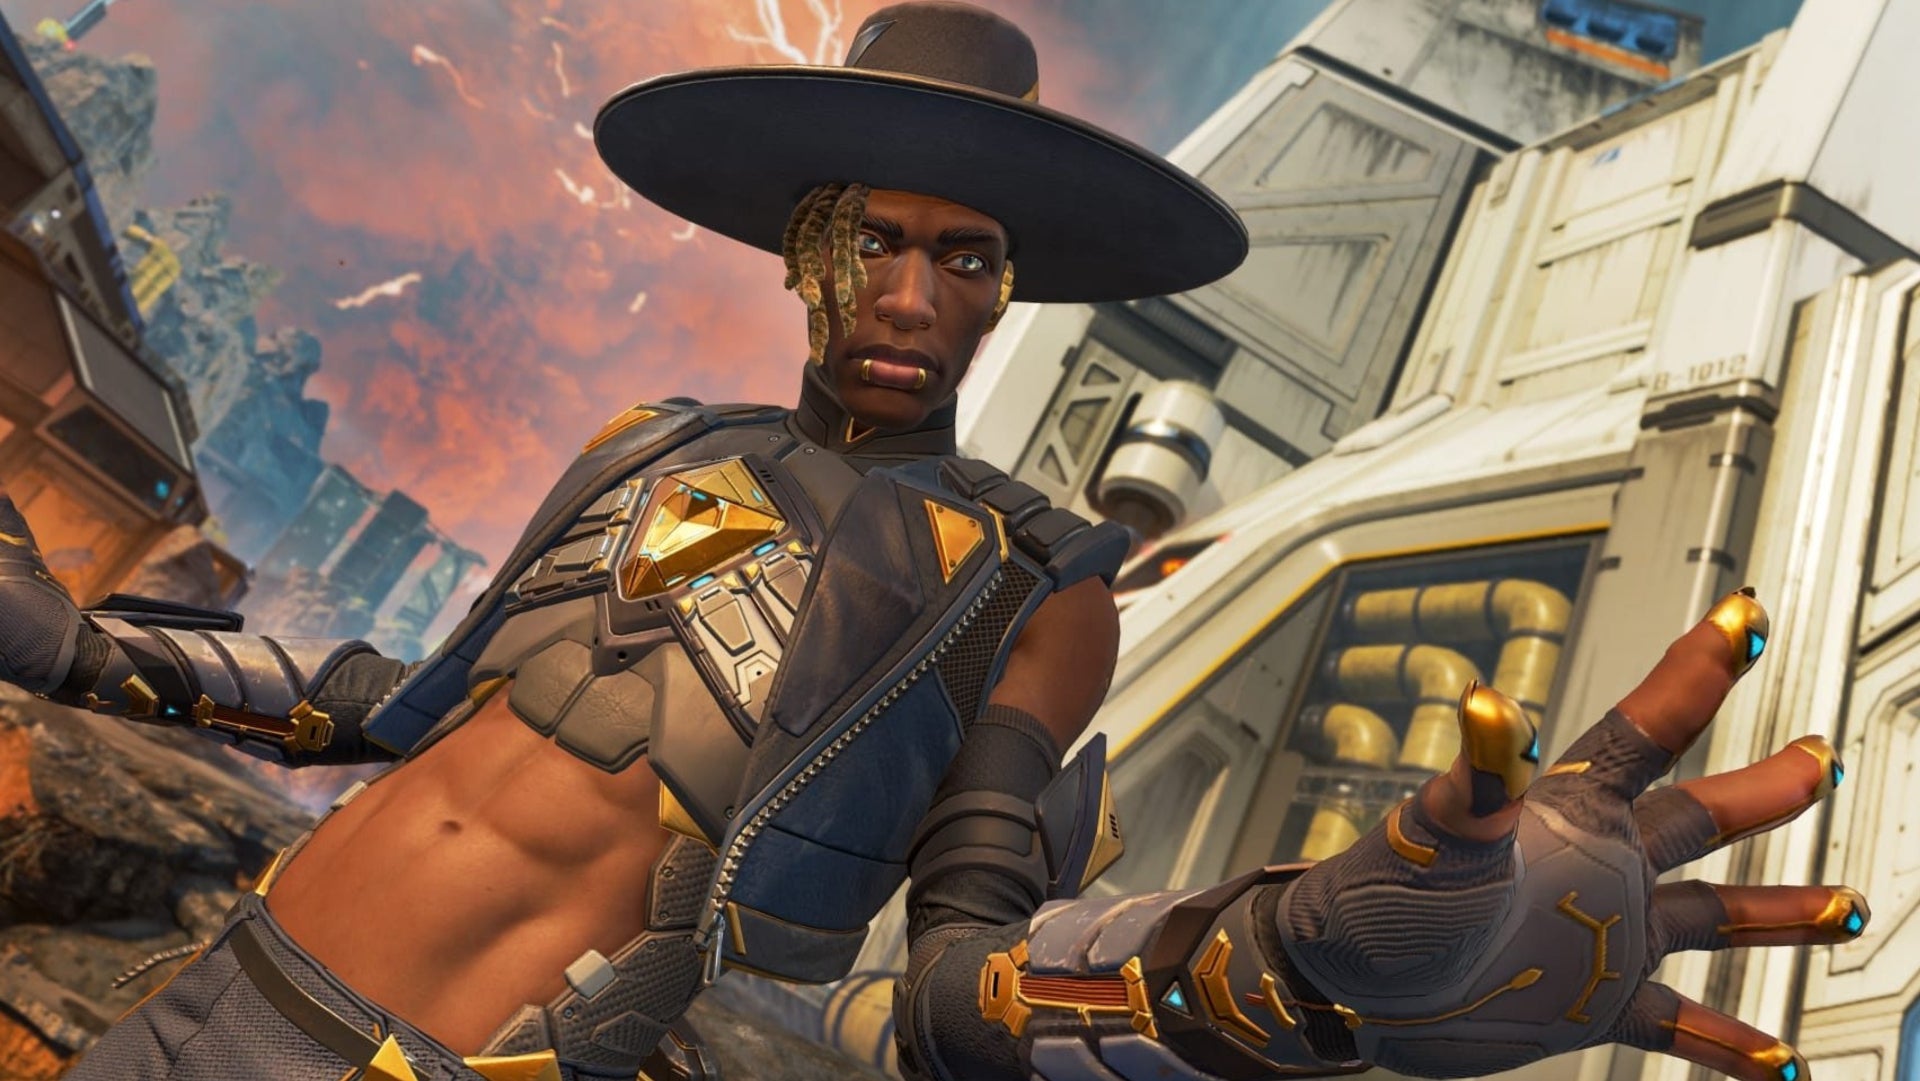 Apex Legends, official Respawn screenshot of Seer from the Emergence season.